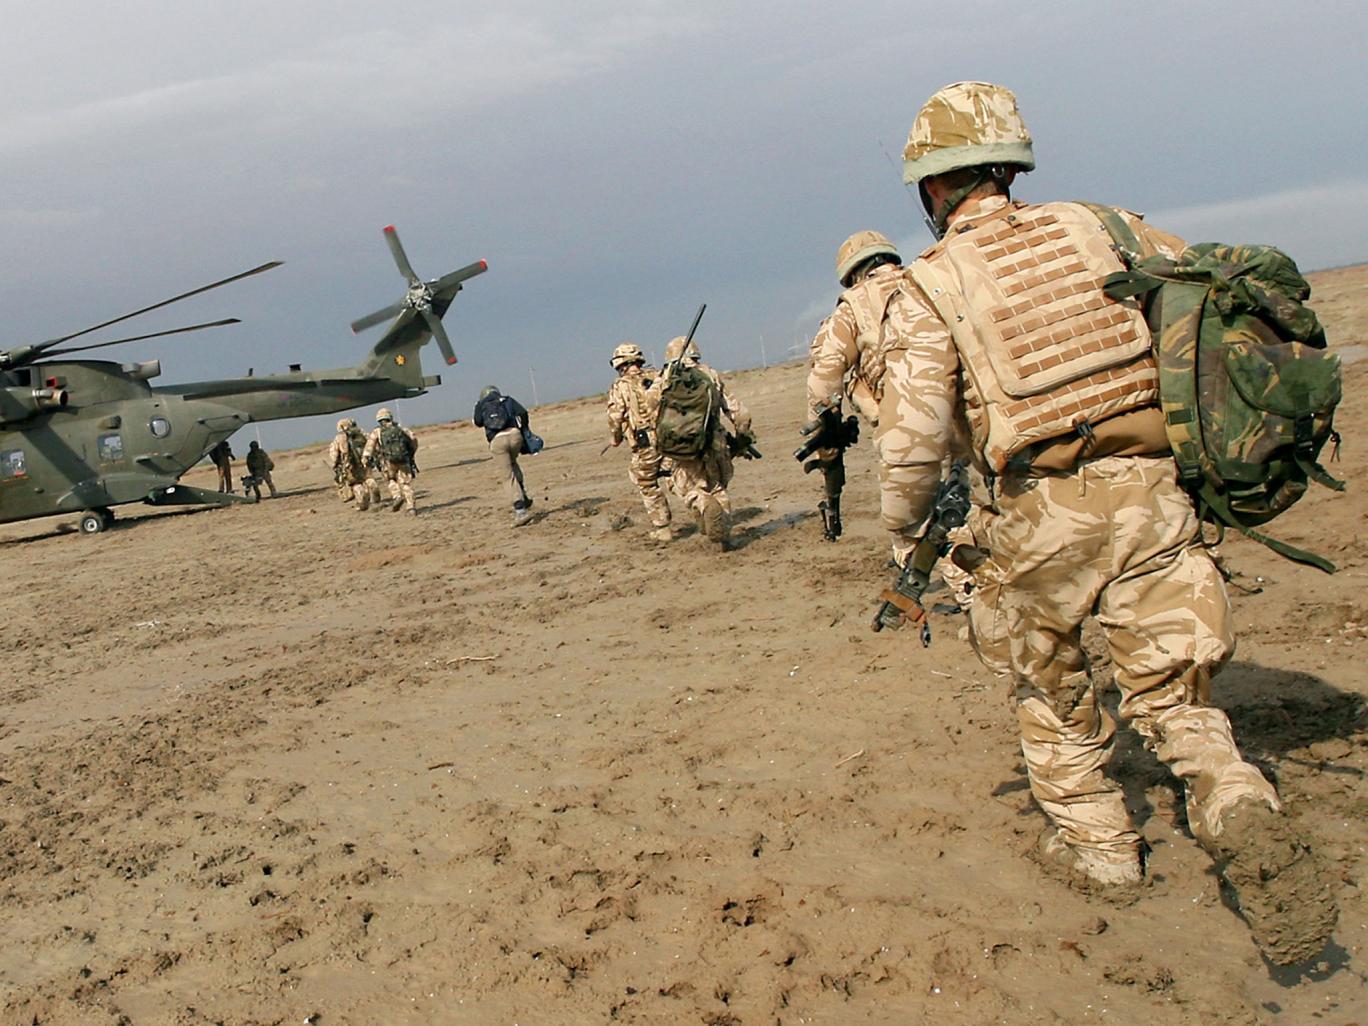 United Kingdom Deplyoing 250 More Troops to Iraq